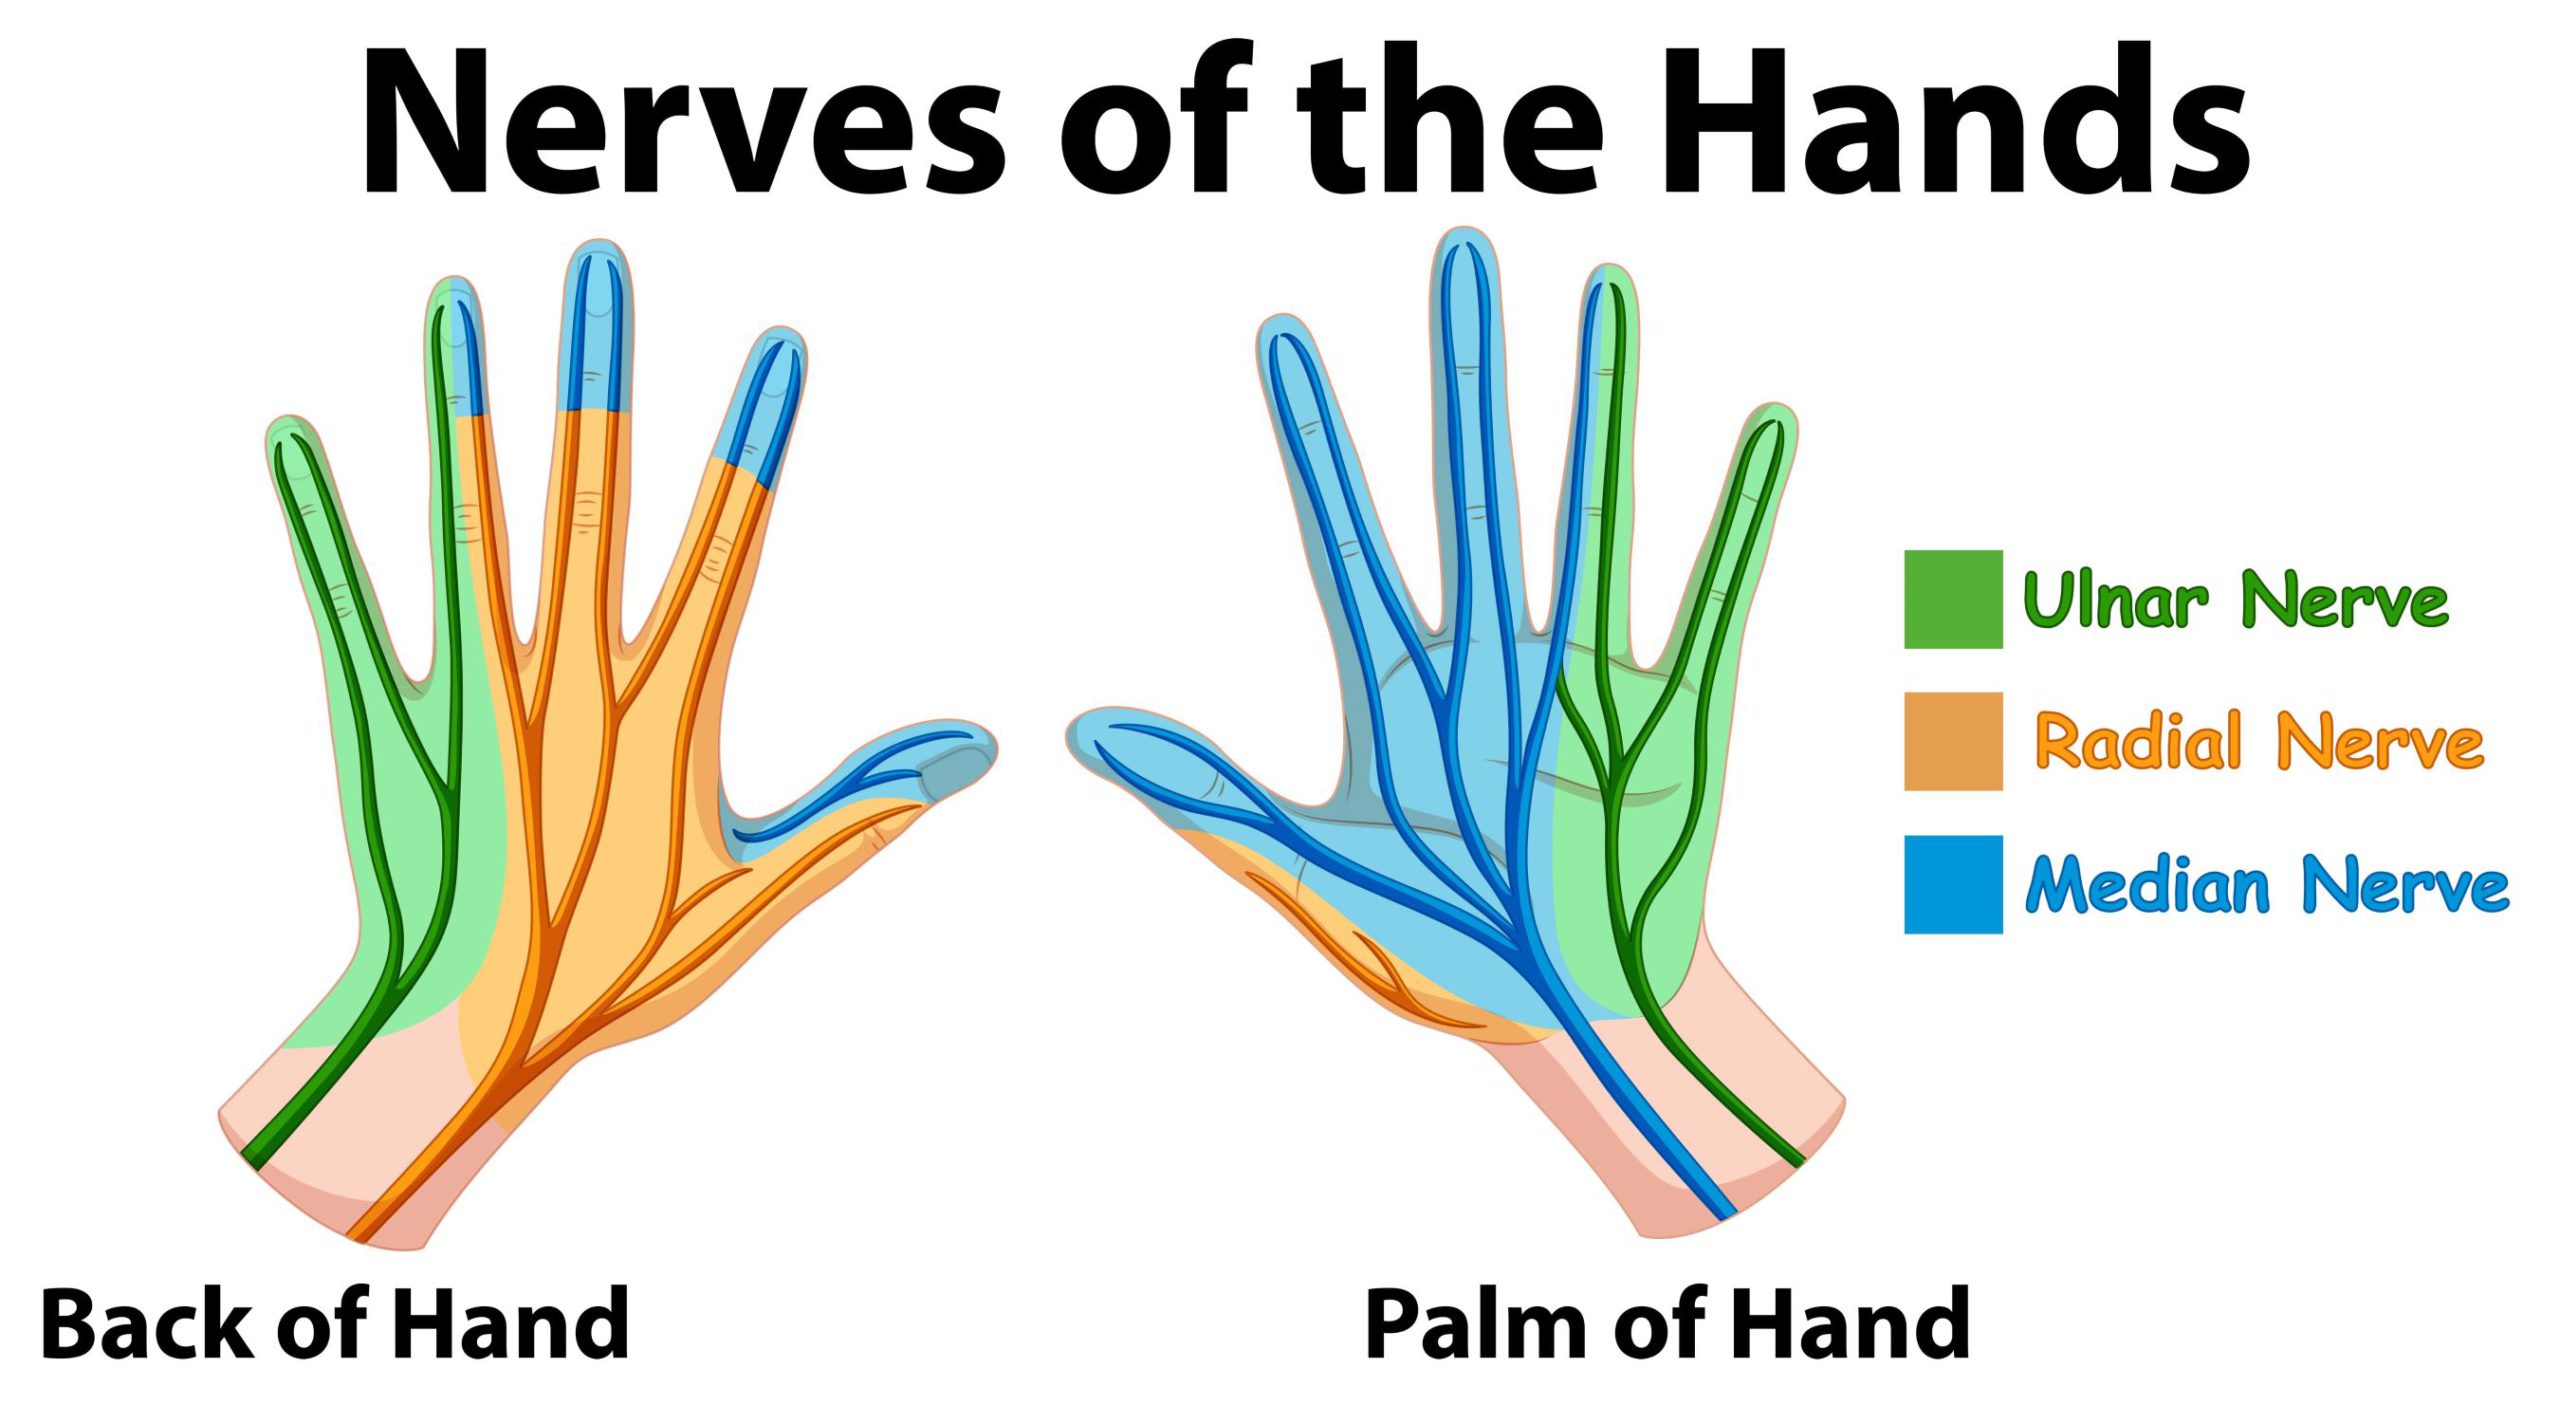 Nerve of the hands